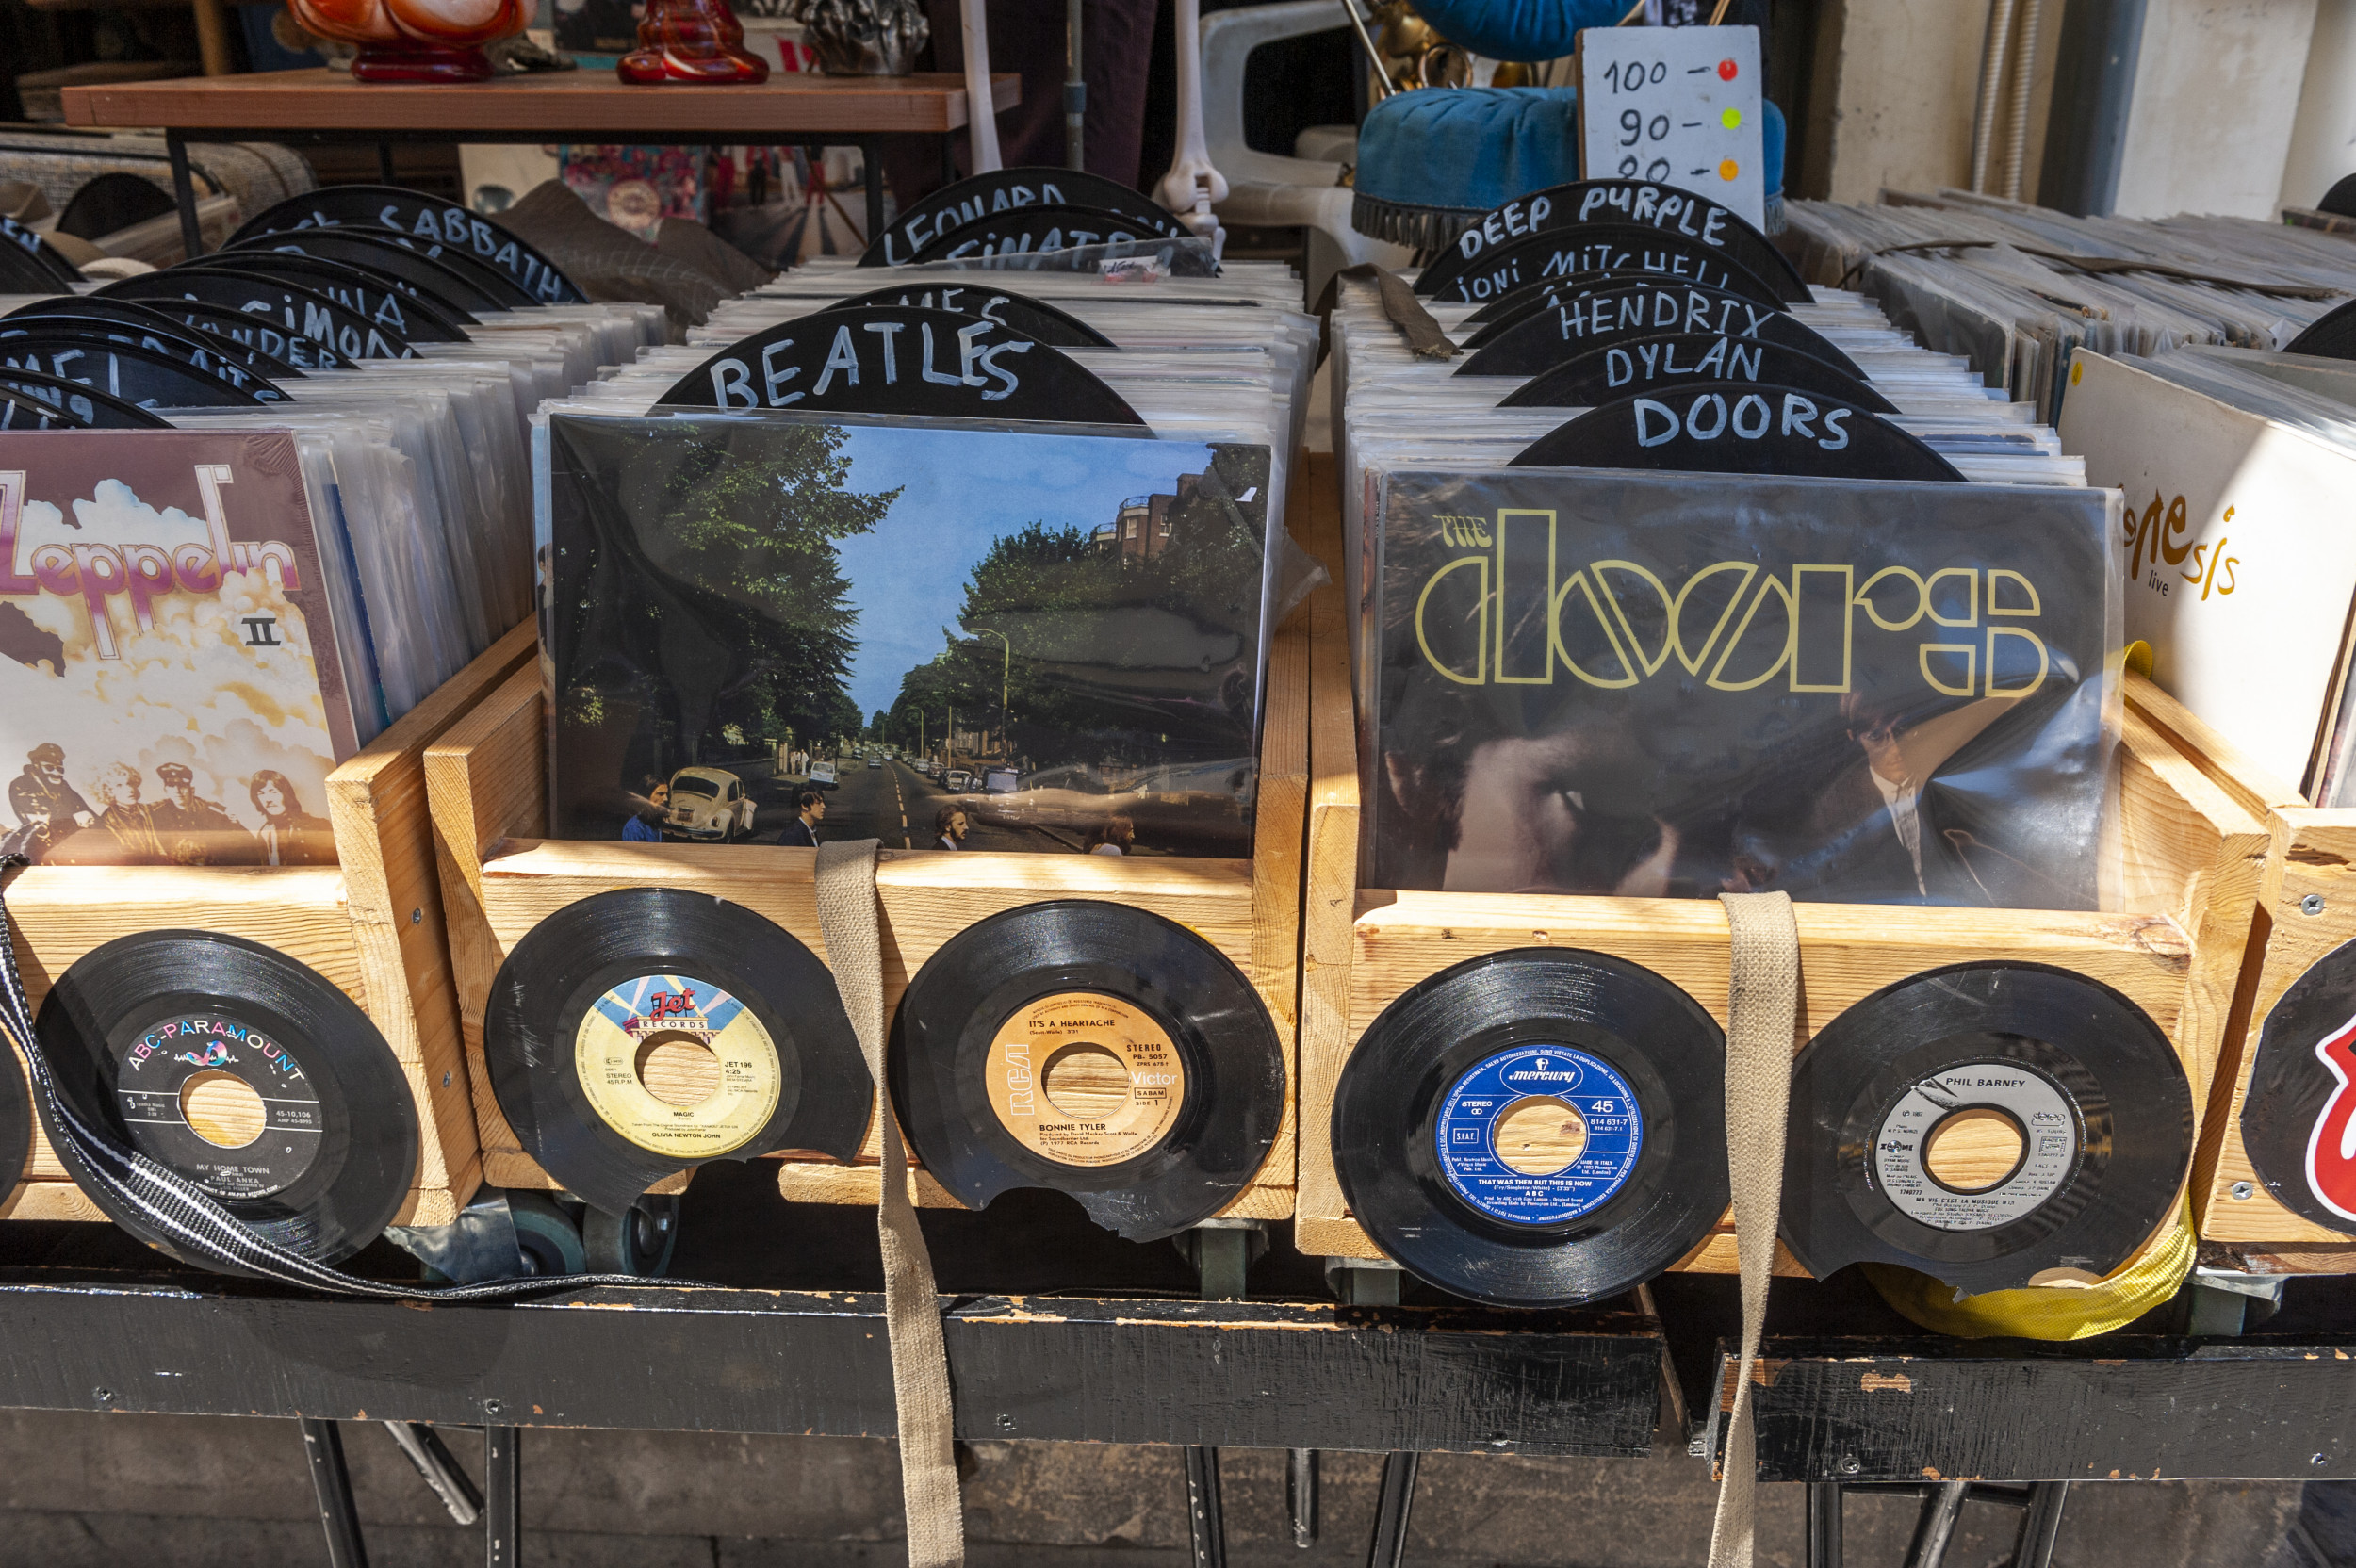 To accelerate Exemption Shipping Vinyl Record 'Melts' in Sun During Brutal British 'Heatwave'